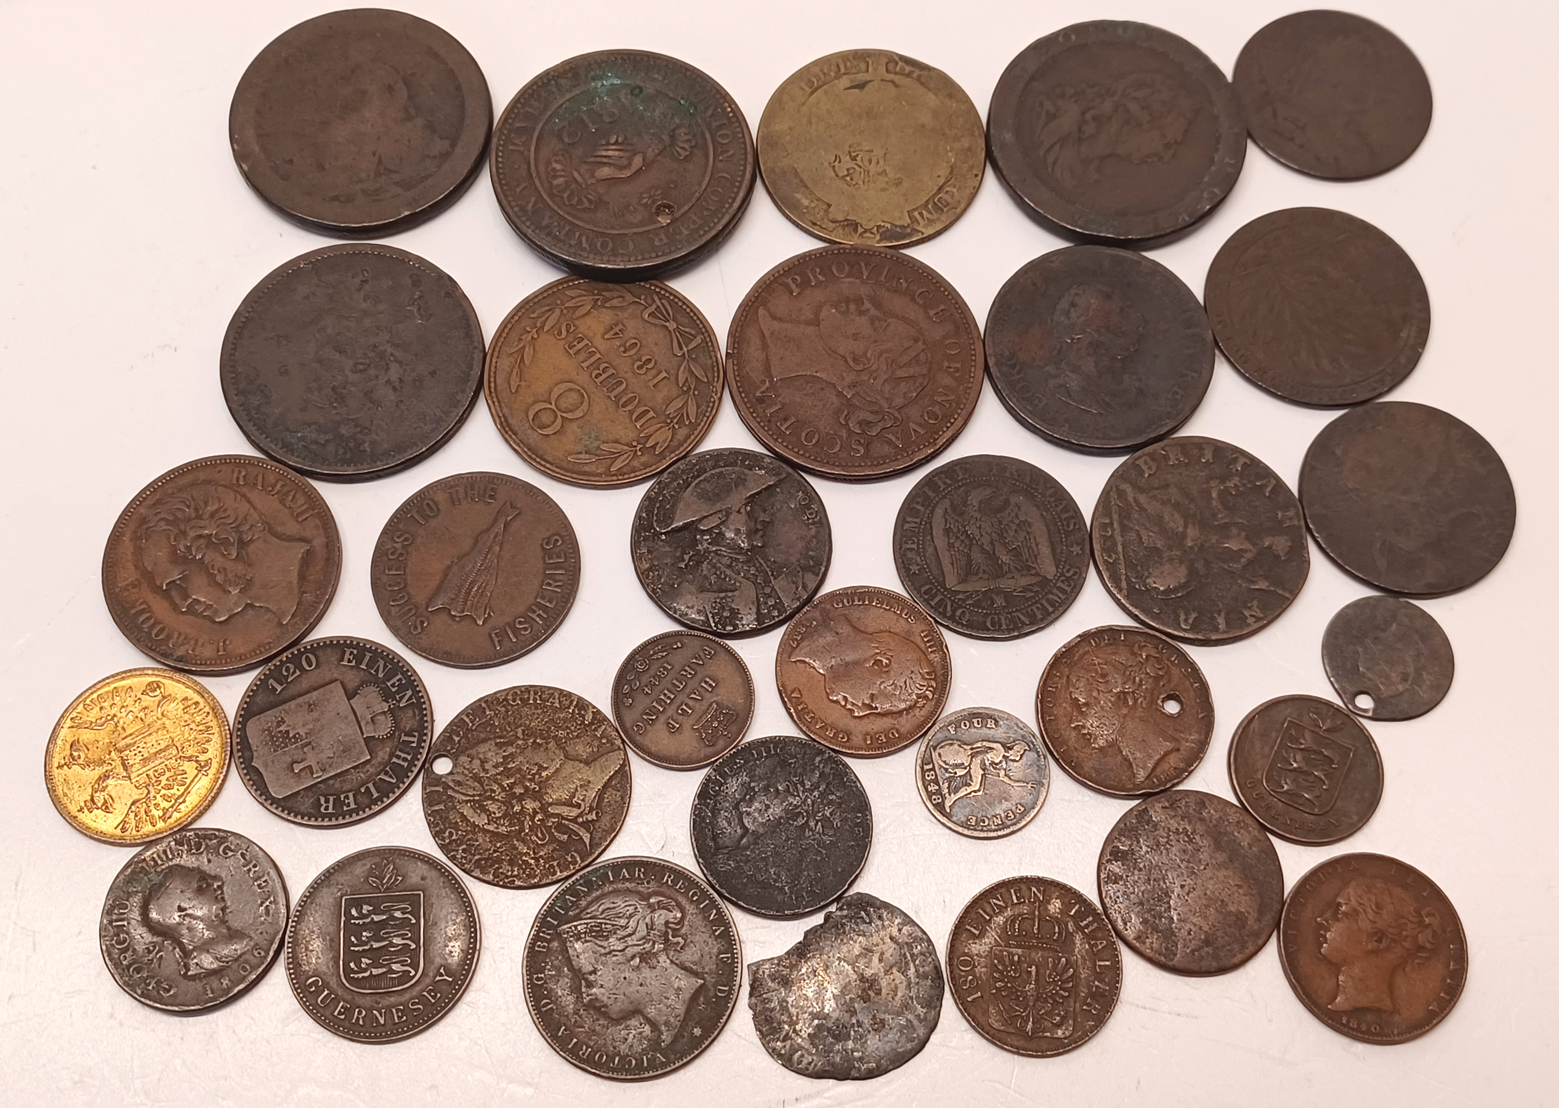 TUB OF MAINLY BRITISH COINS - INC. 1812 ONE PENNY TOKEN,1840 ONE PENNY,1792 CARTWHEEL ETC. - Image 2 of 2